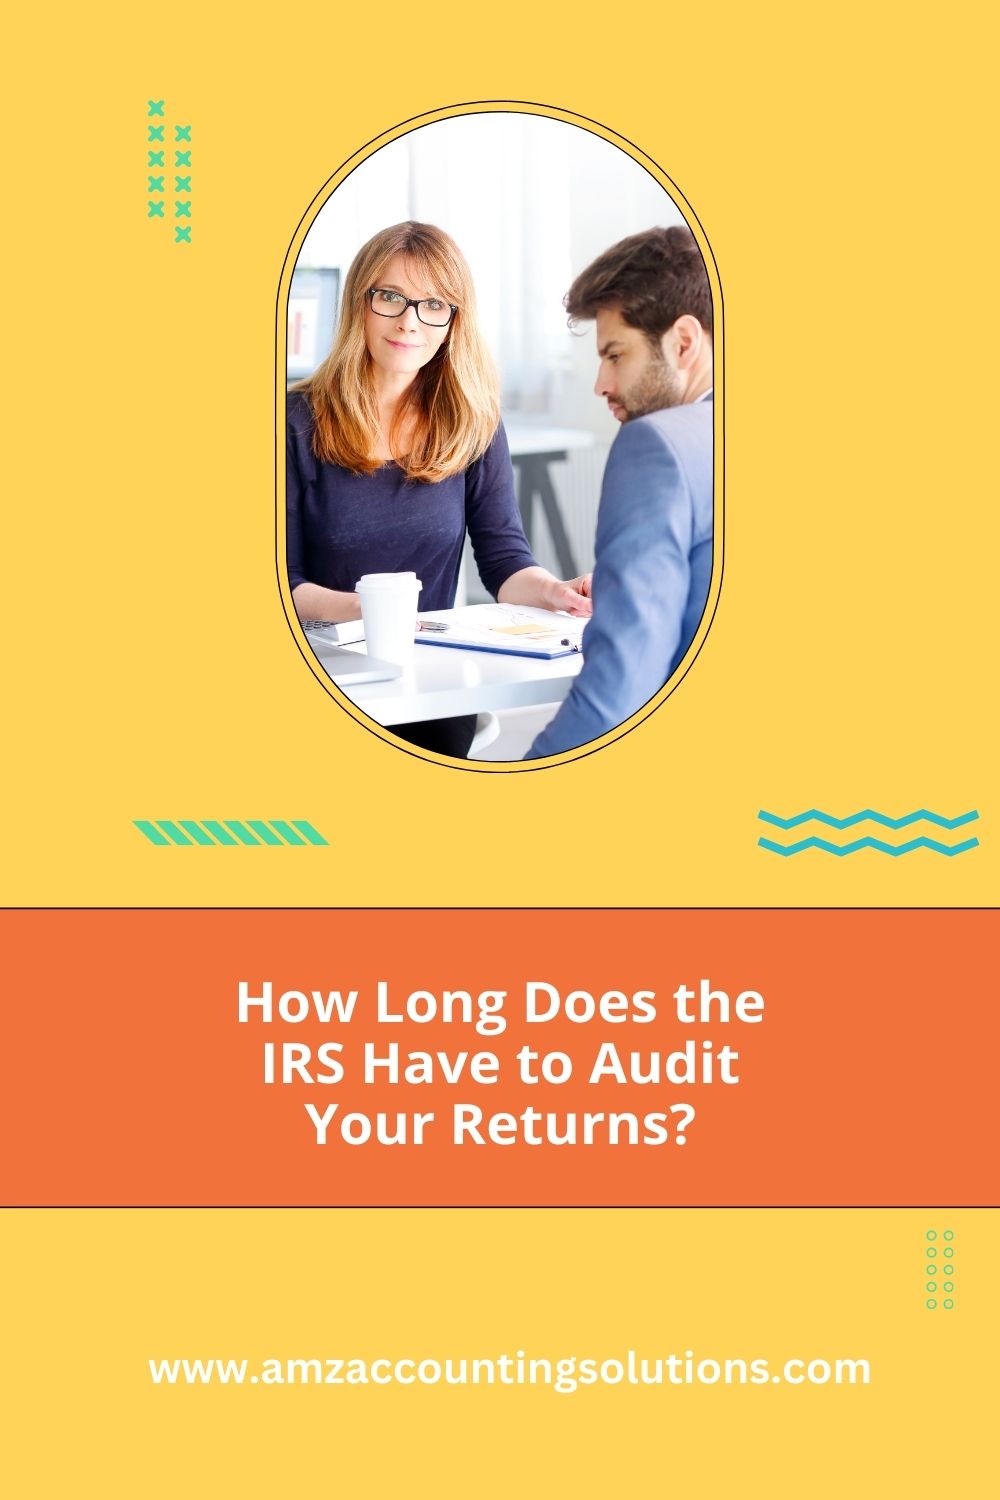 How Long Does the IRS Have to Audit Your Returns?